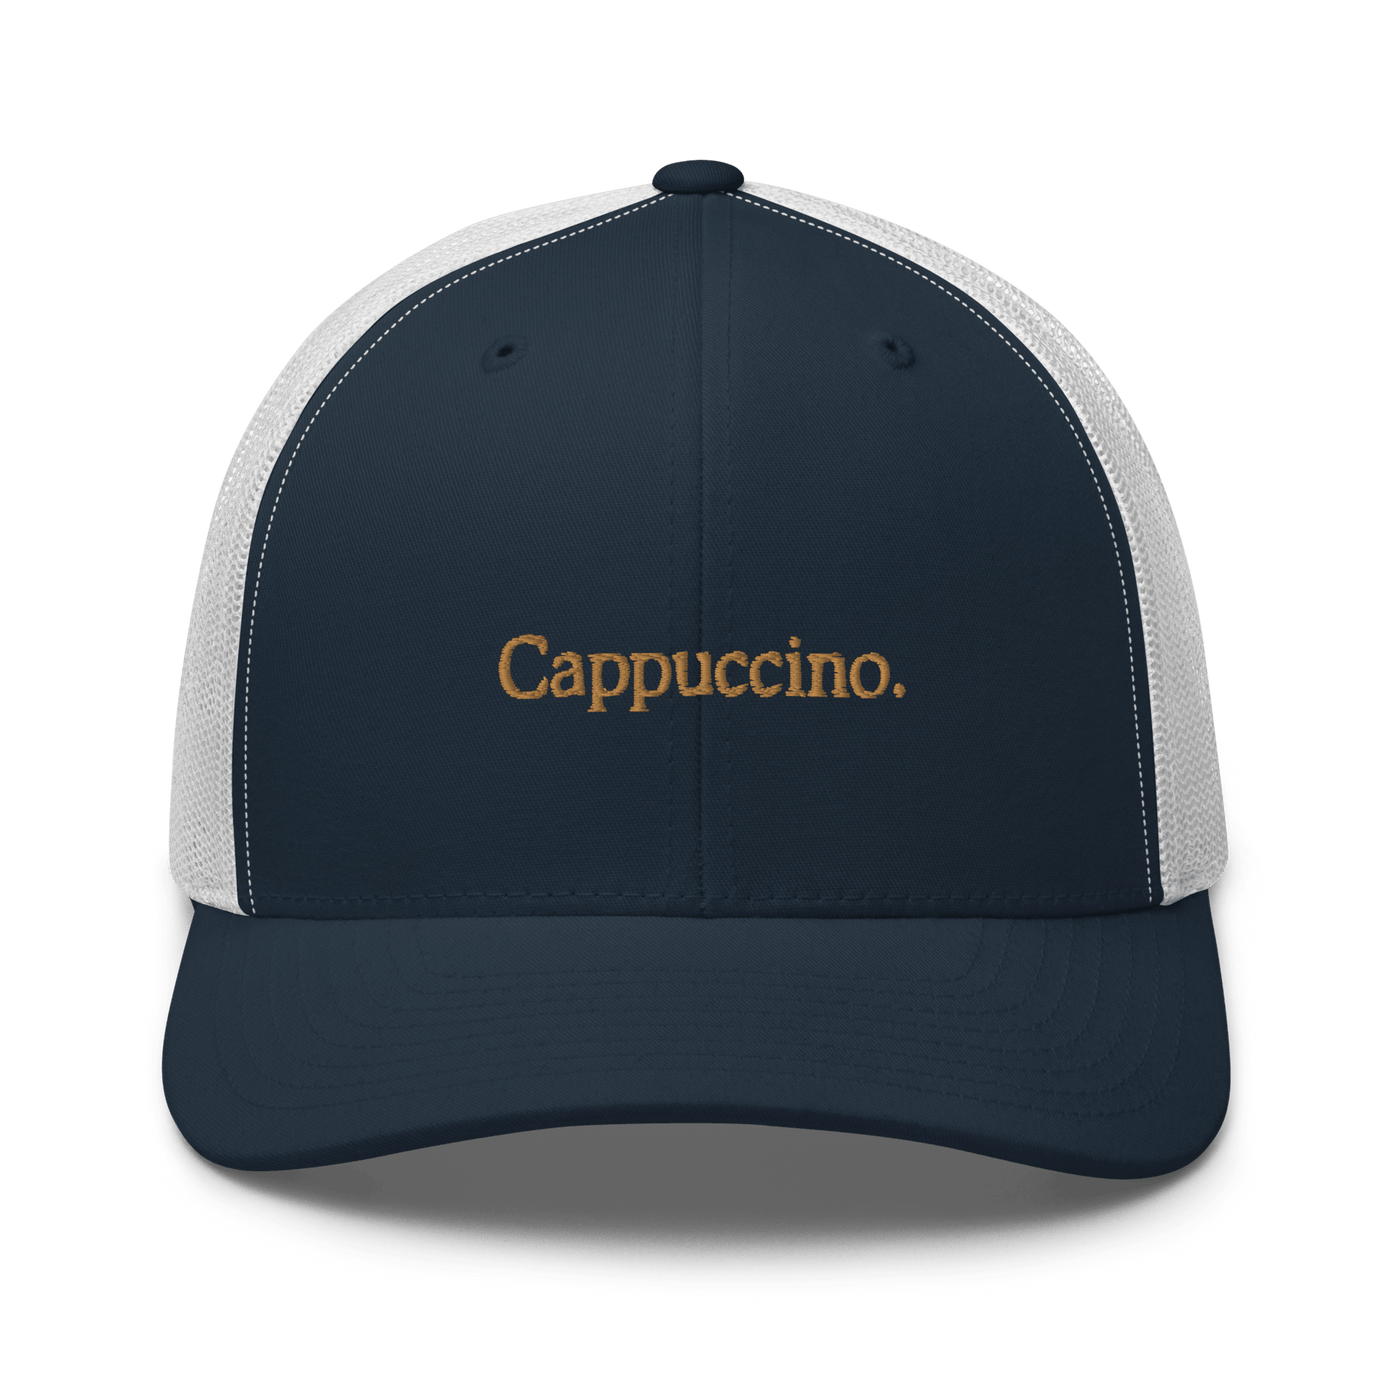 Cappuccino. Trucker Cap - Navy/ White - - Just Another Cap Store